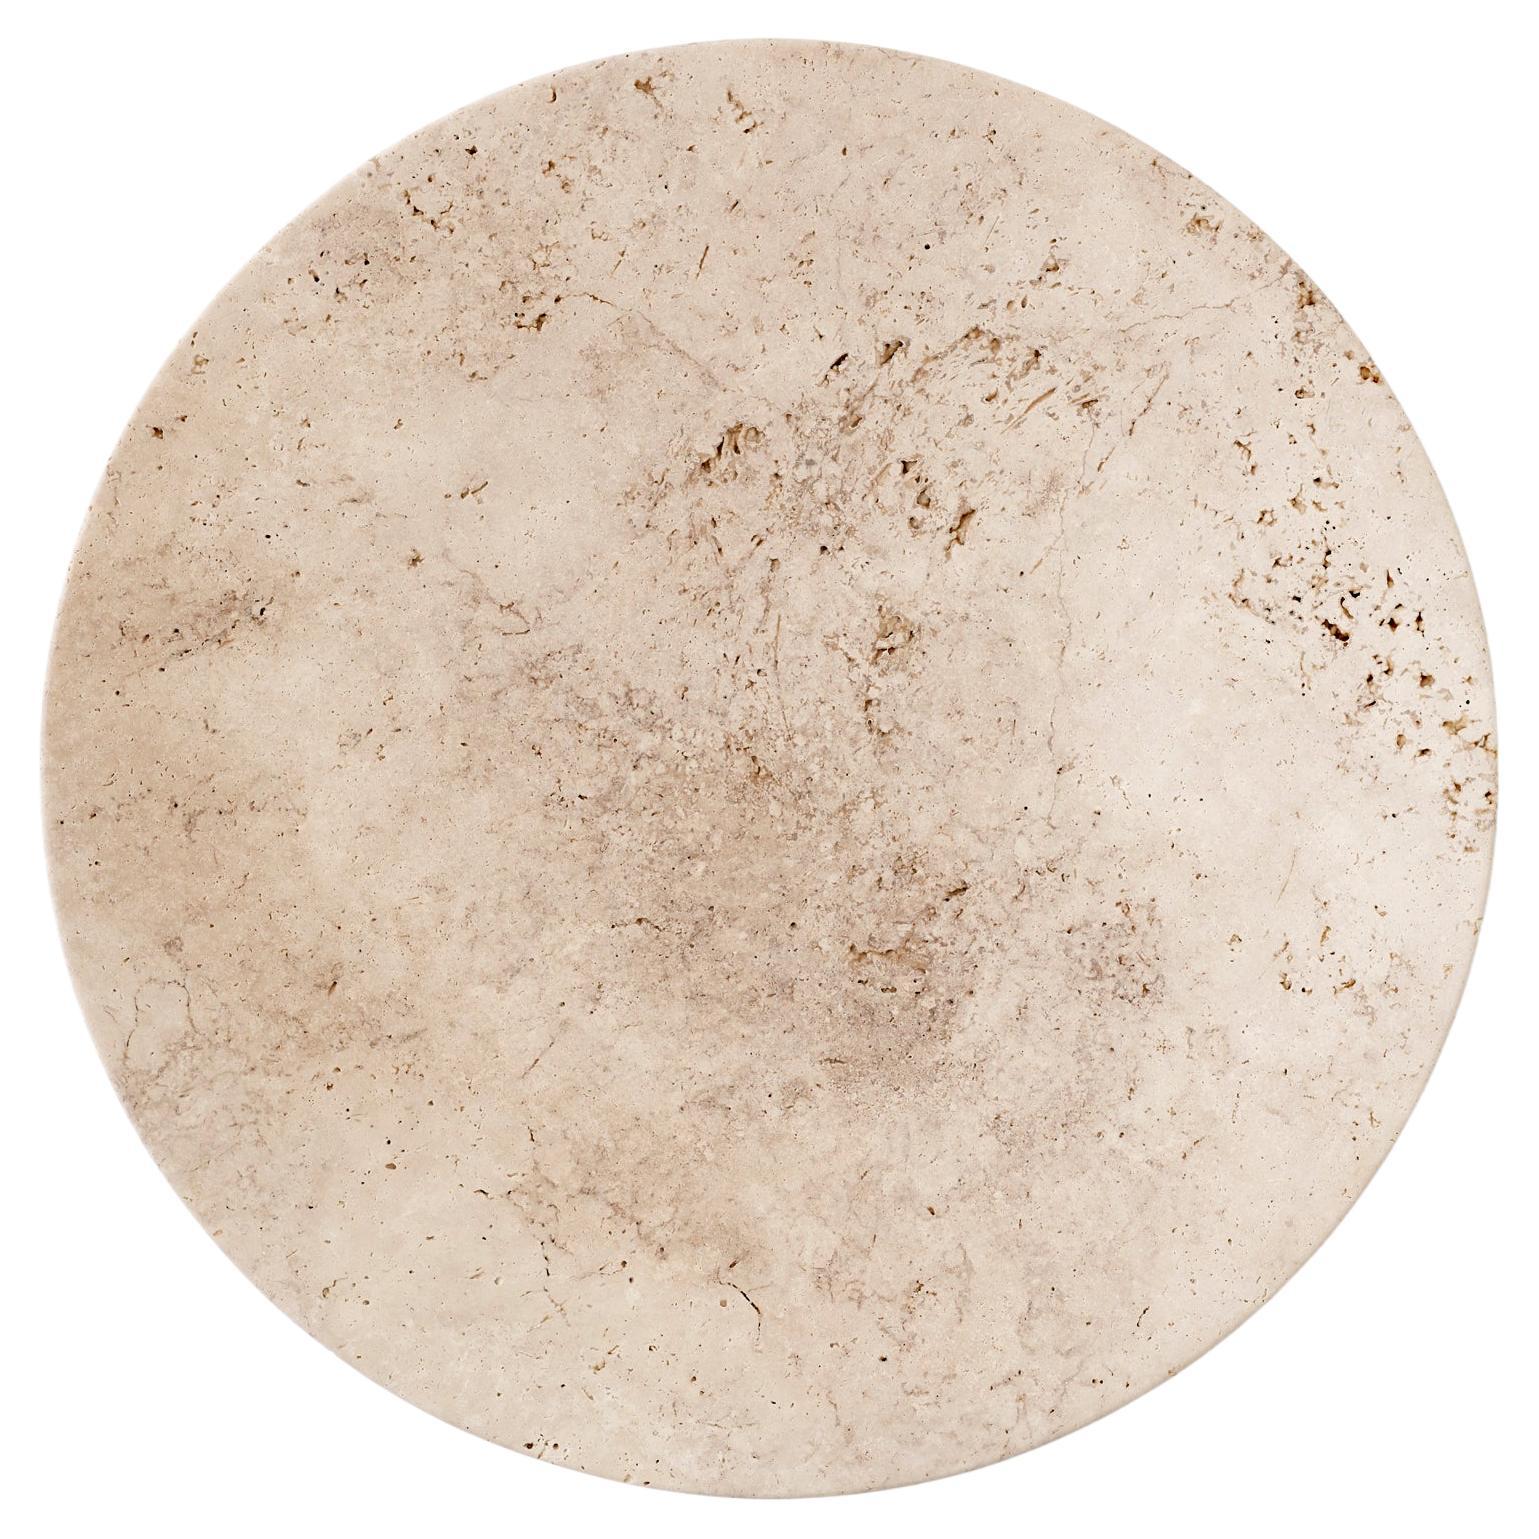 Collect Plate SC55 Beige Travertine by Space Copenhagen for & Tradition